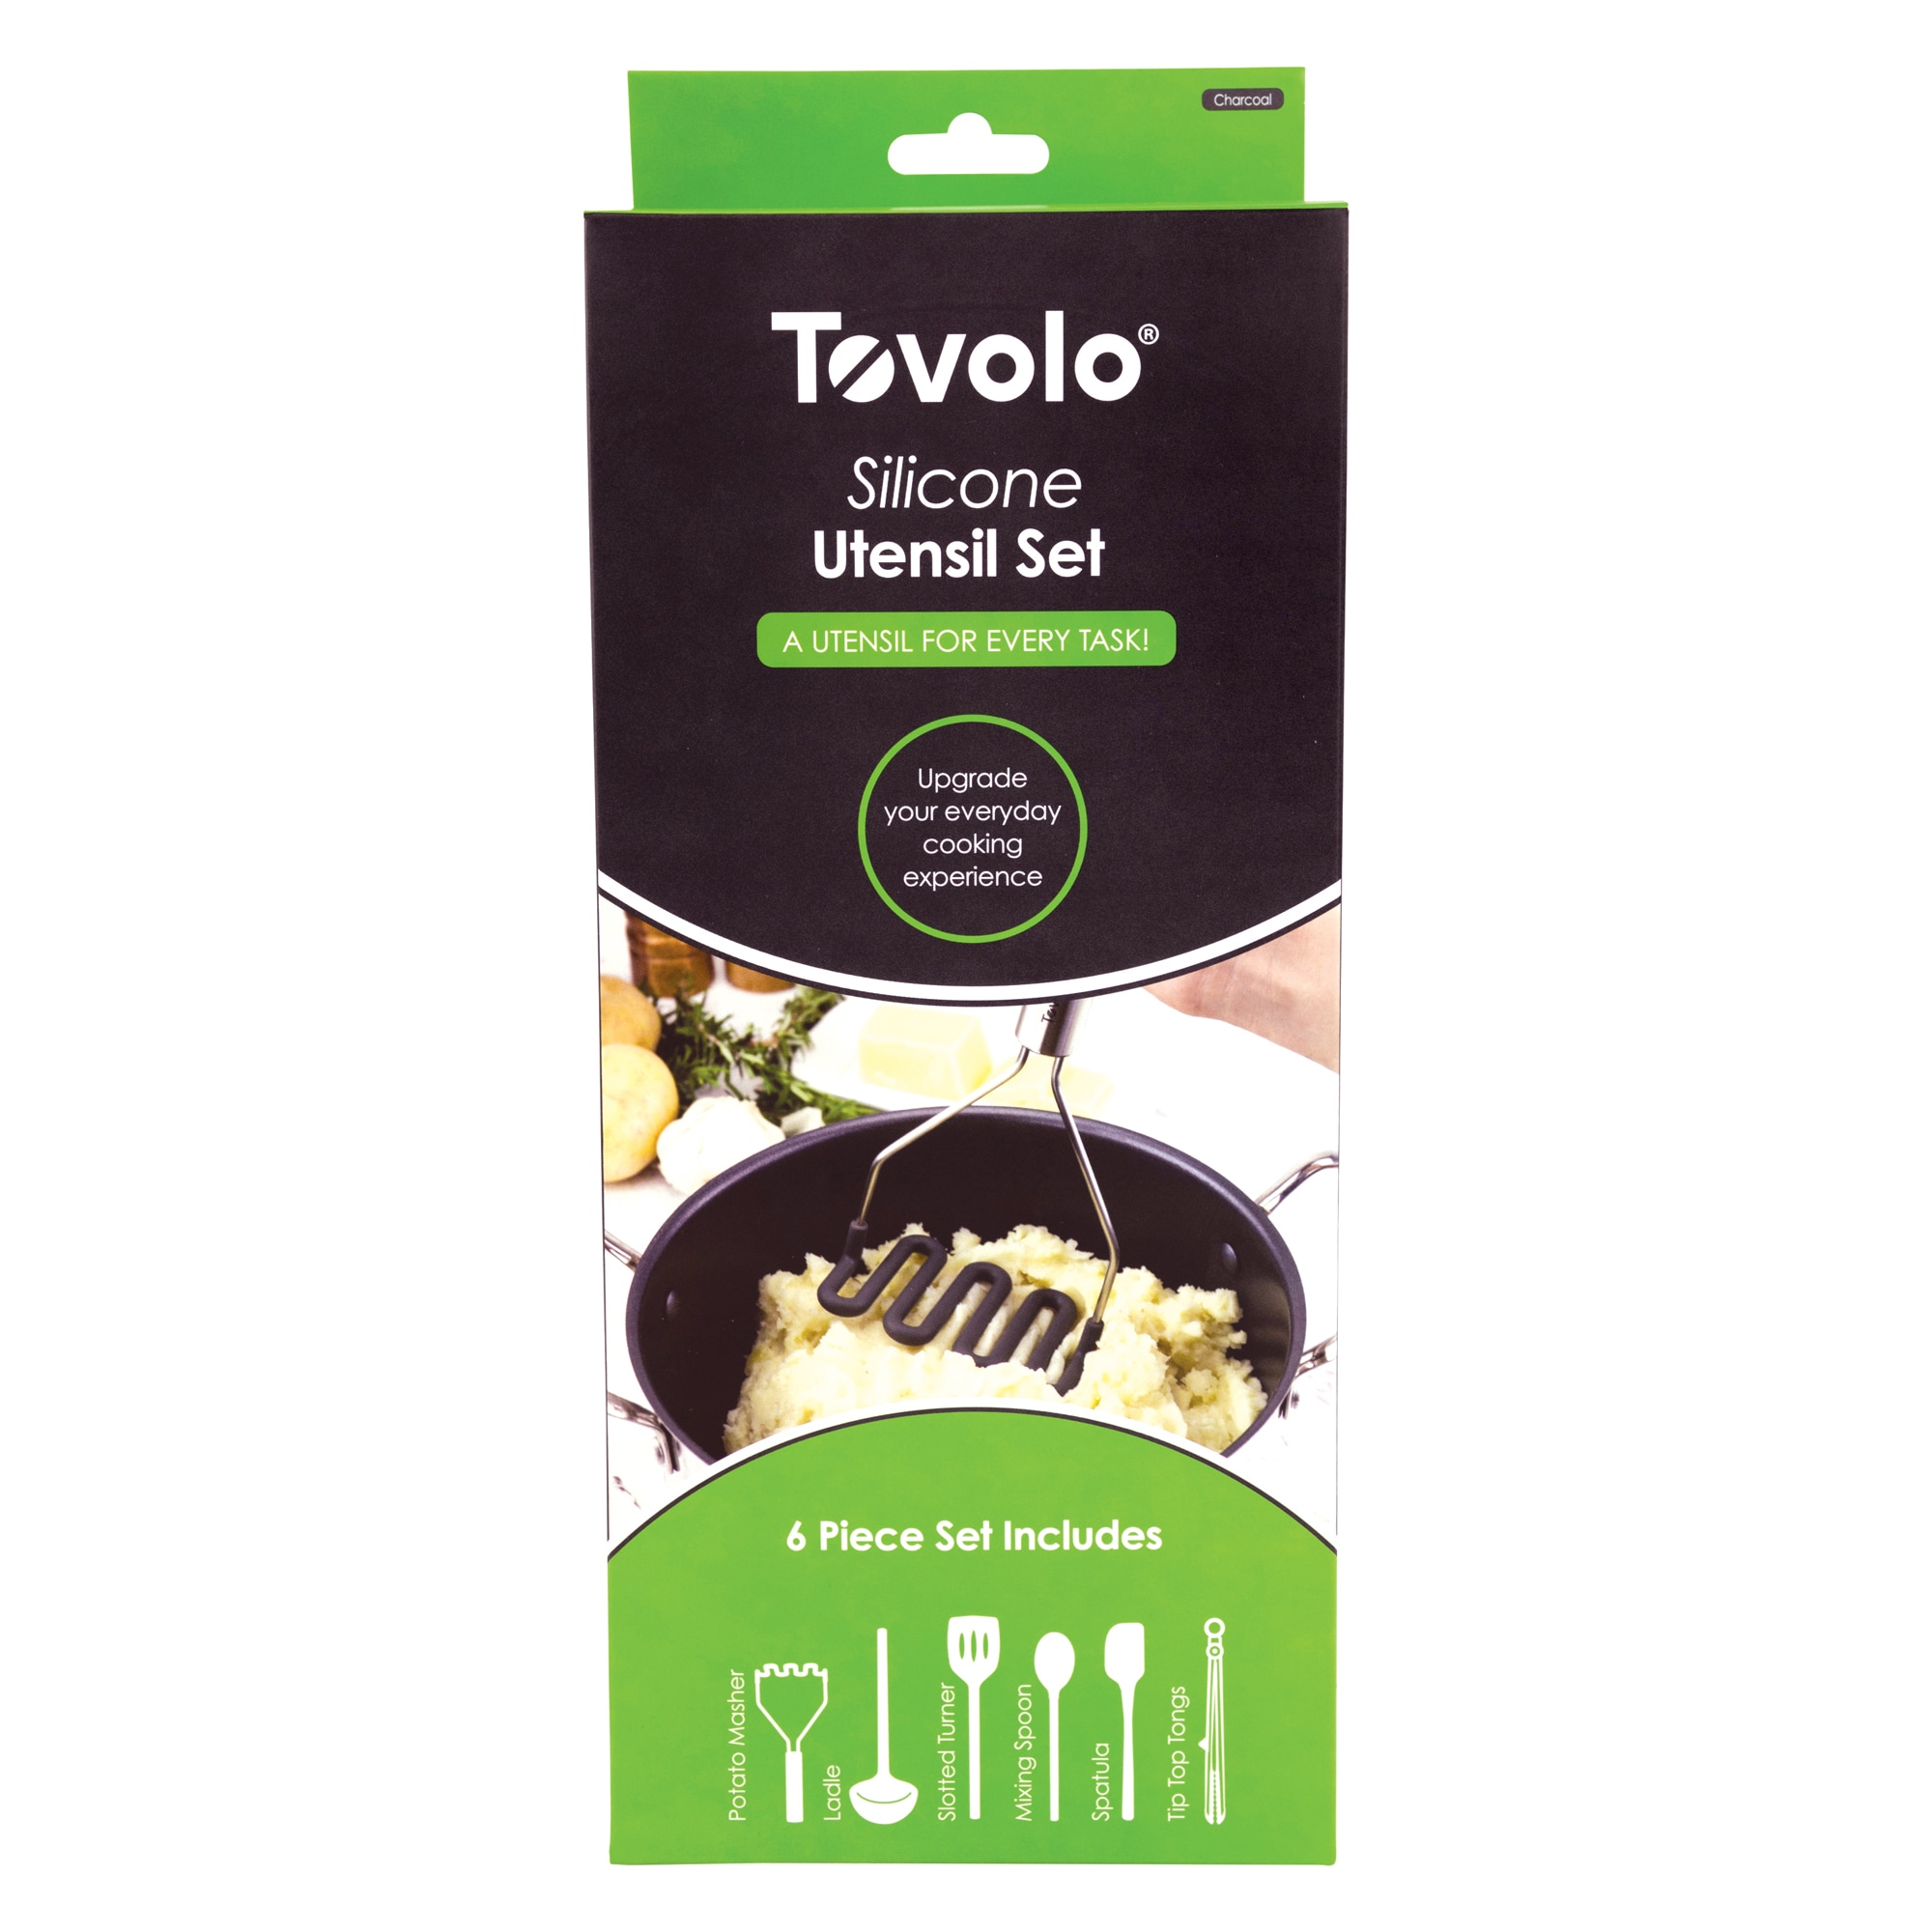 Tovolo Baking & Cooking Utensils Sponsored by Kitchenary